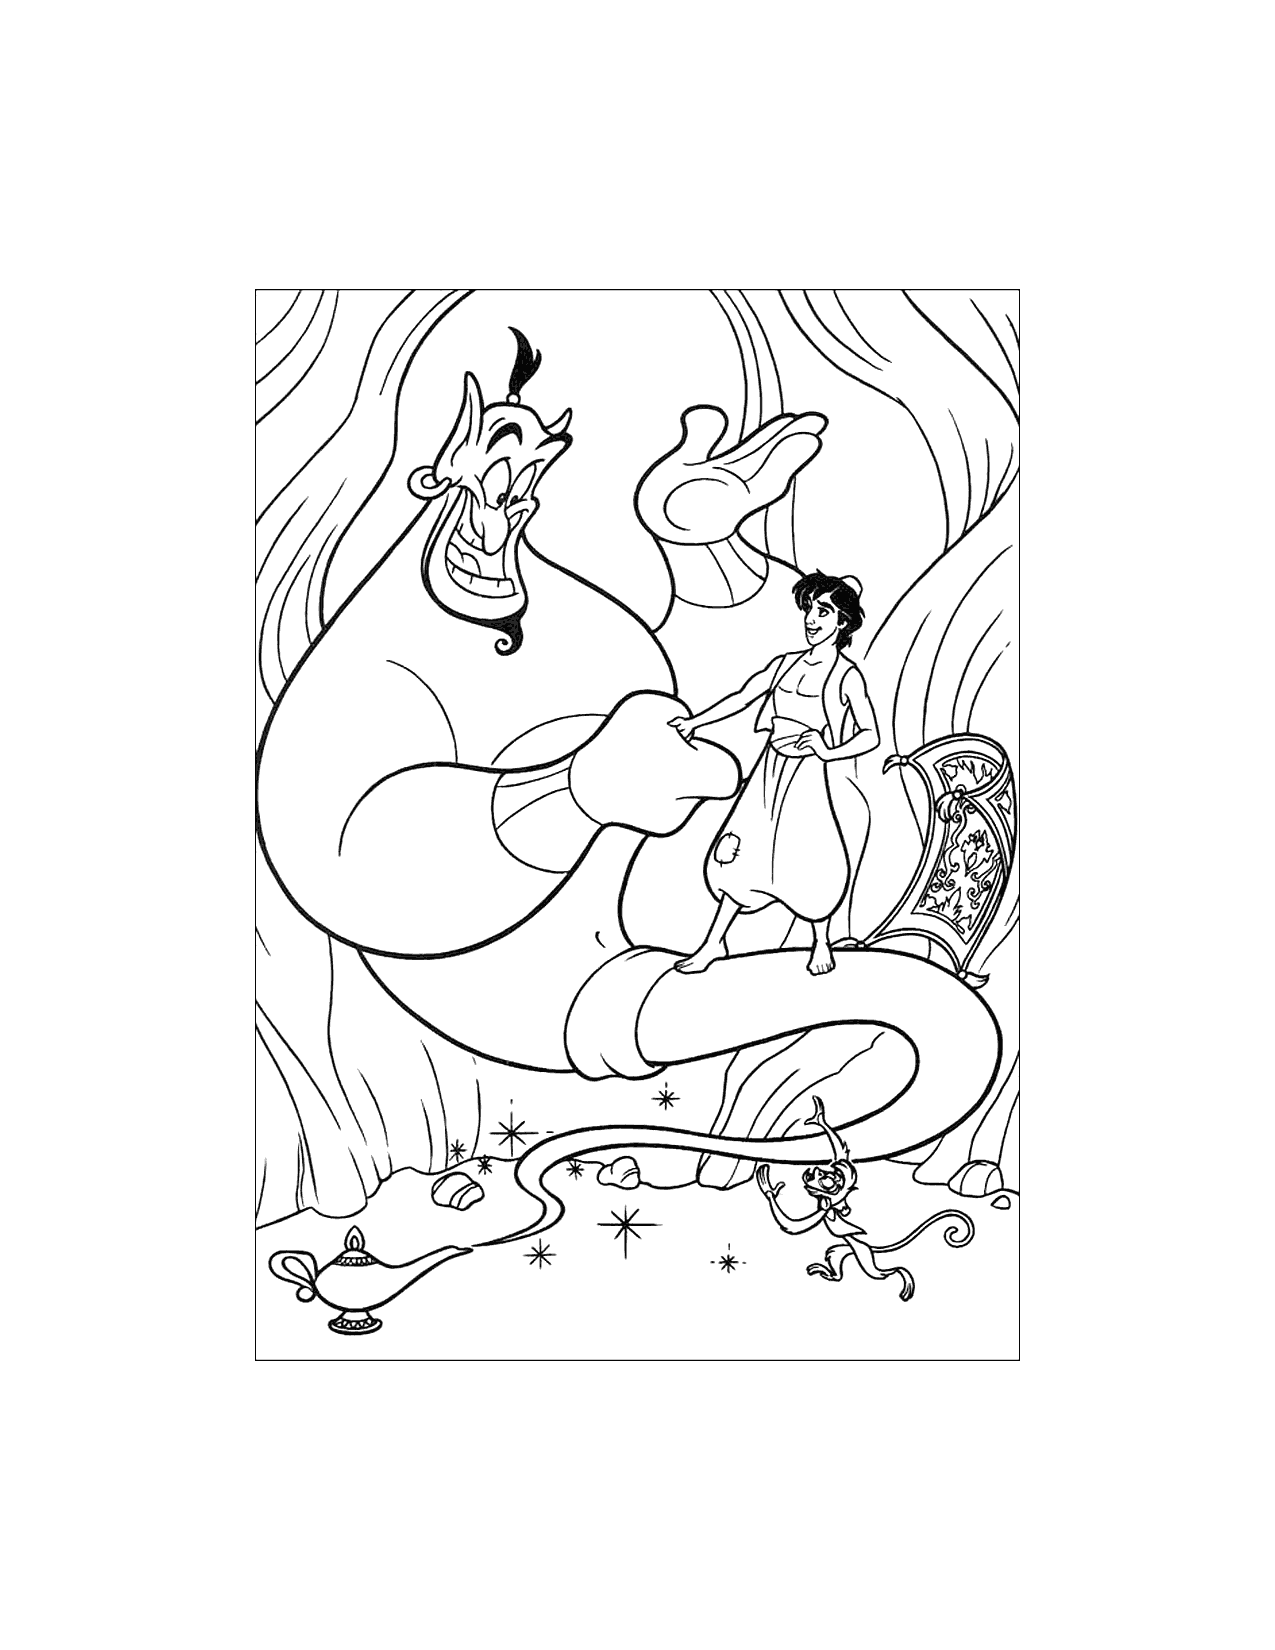 Aladdin Meets Genie Coloring Page